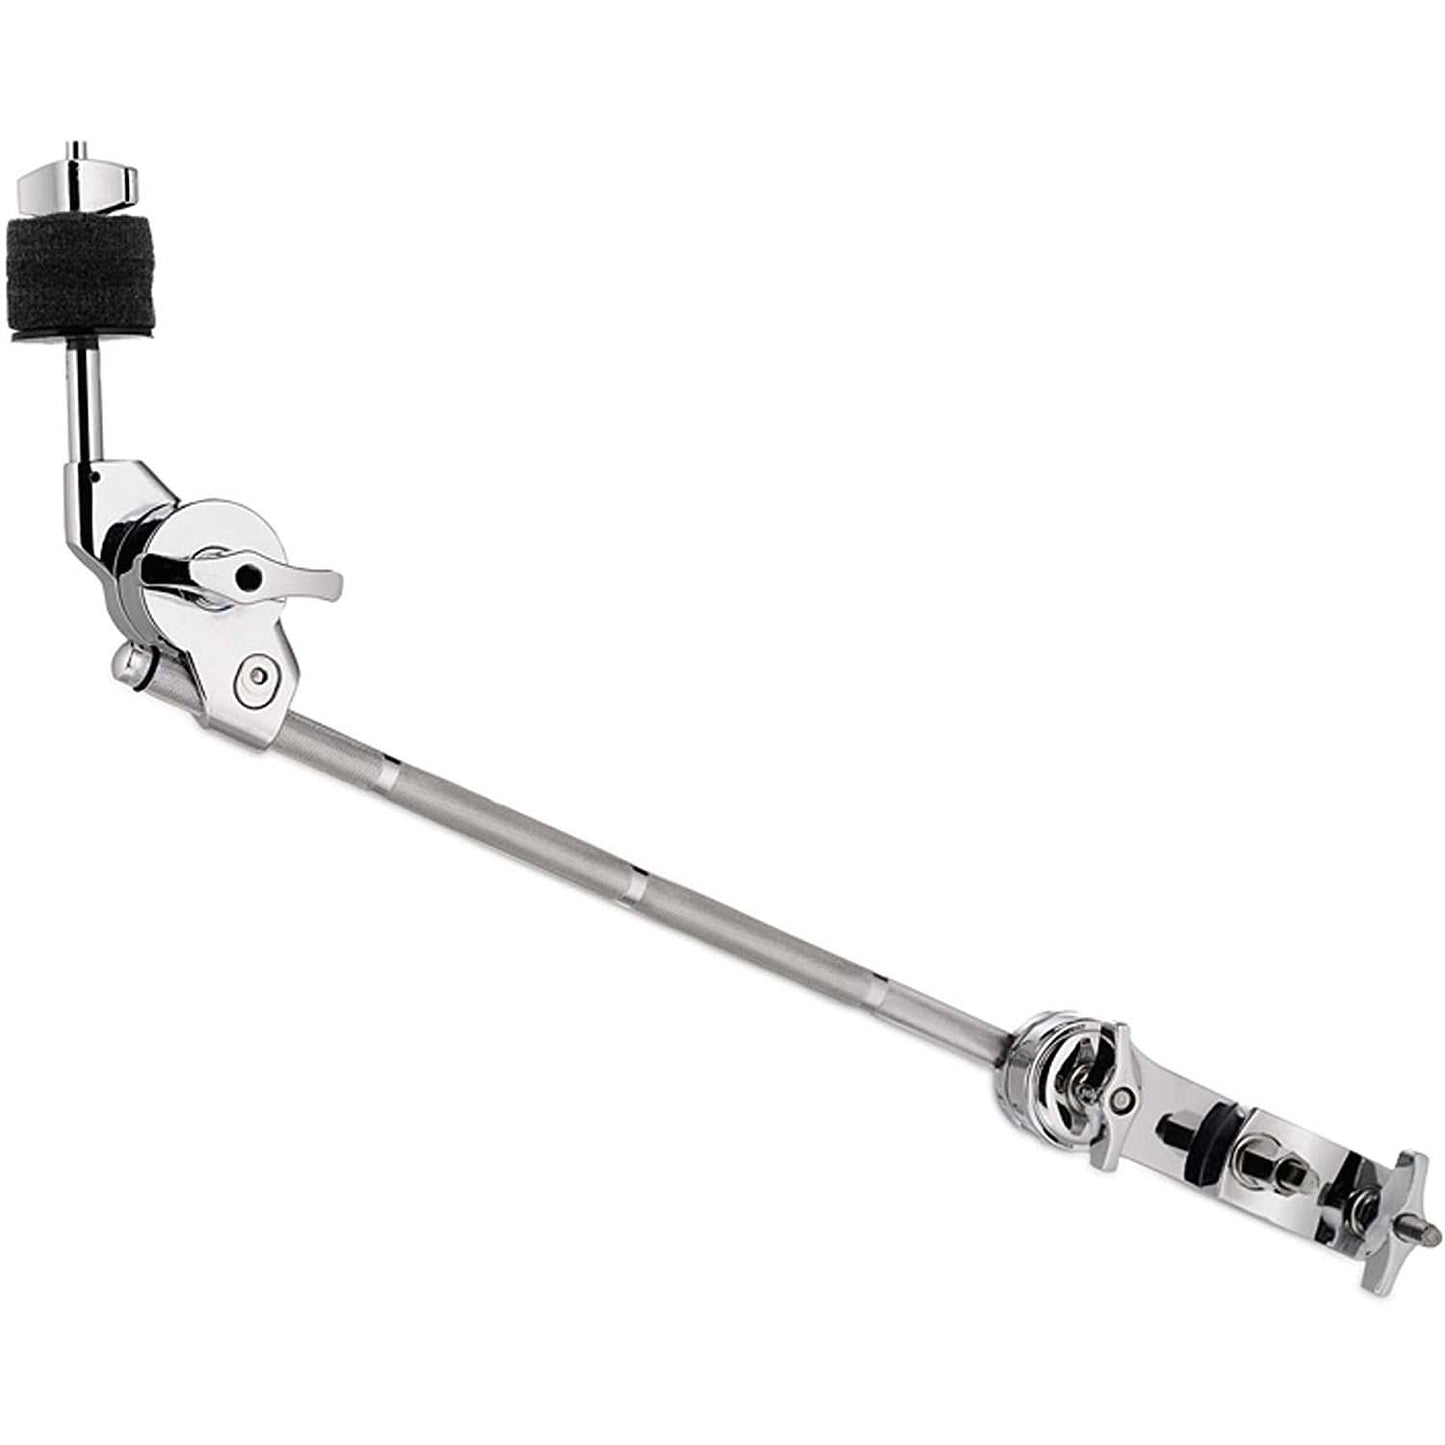 Pacific Drums & Percussion Concept Cymbal Boom Arm with Mega Clamp